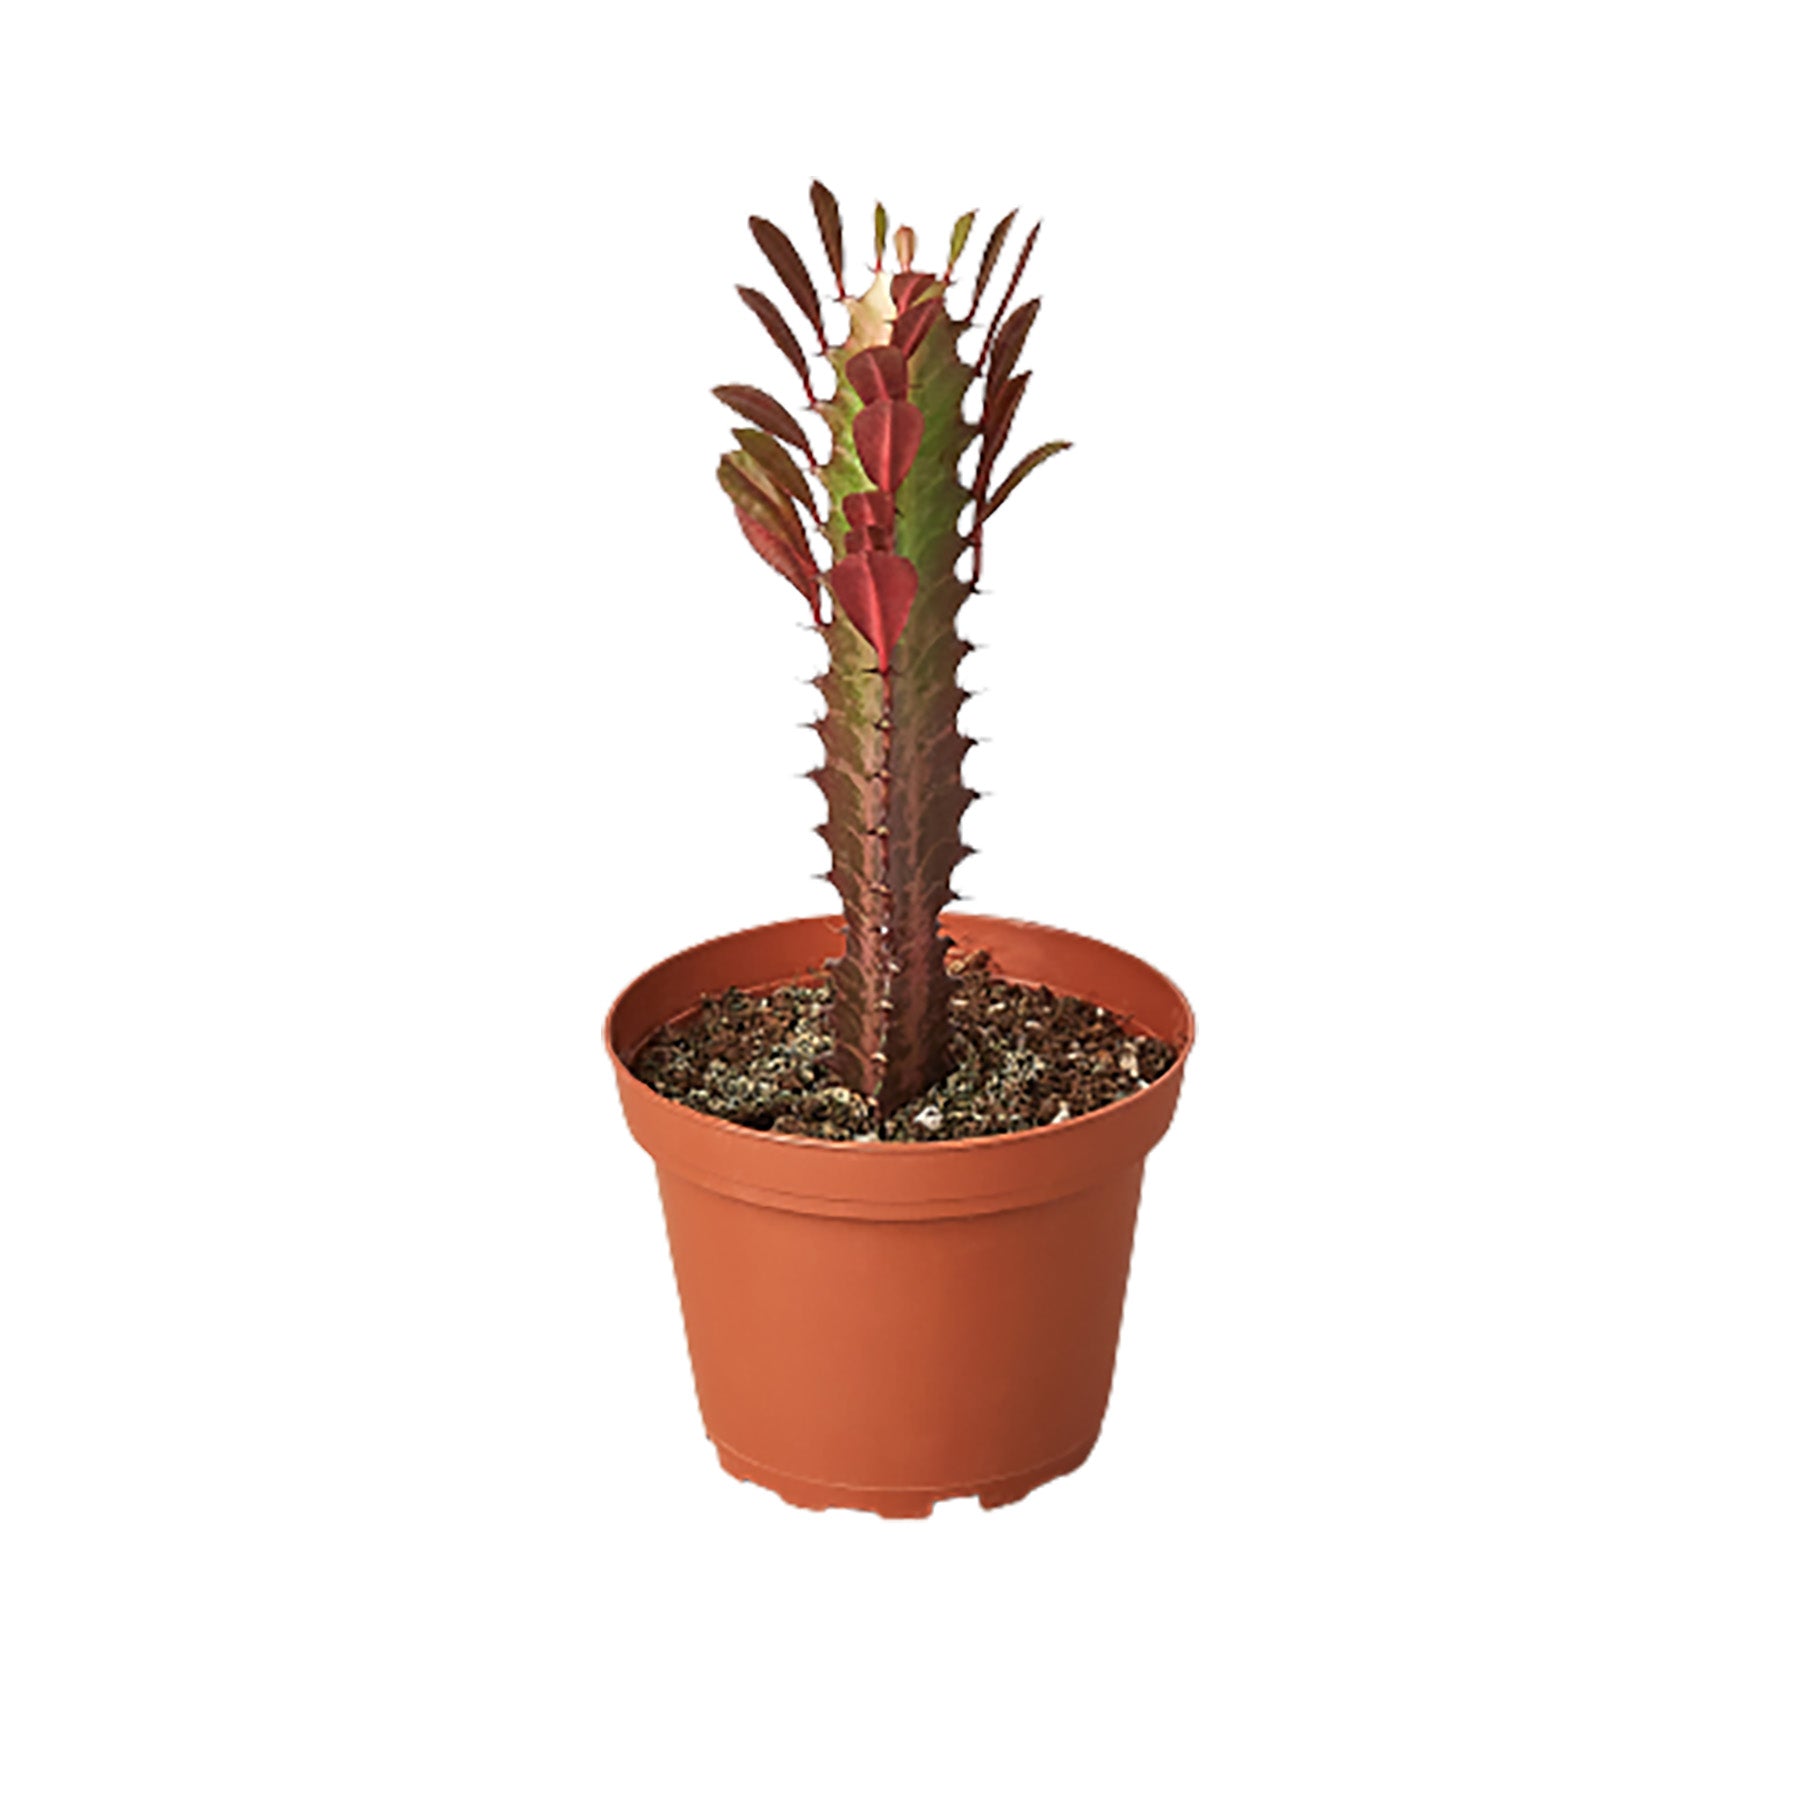 A cactus plant in a pot on a white background, available at one of the top garden centers near me.